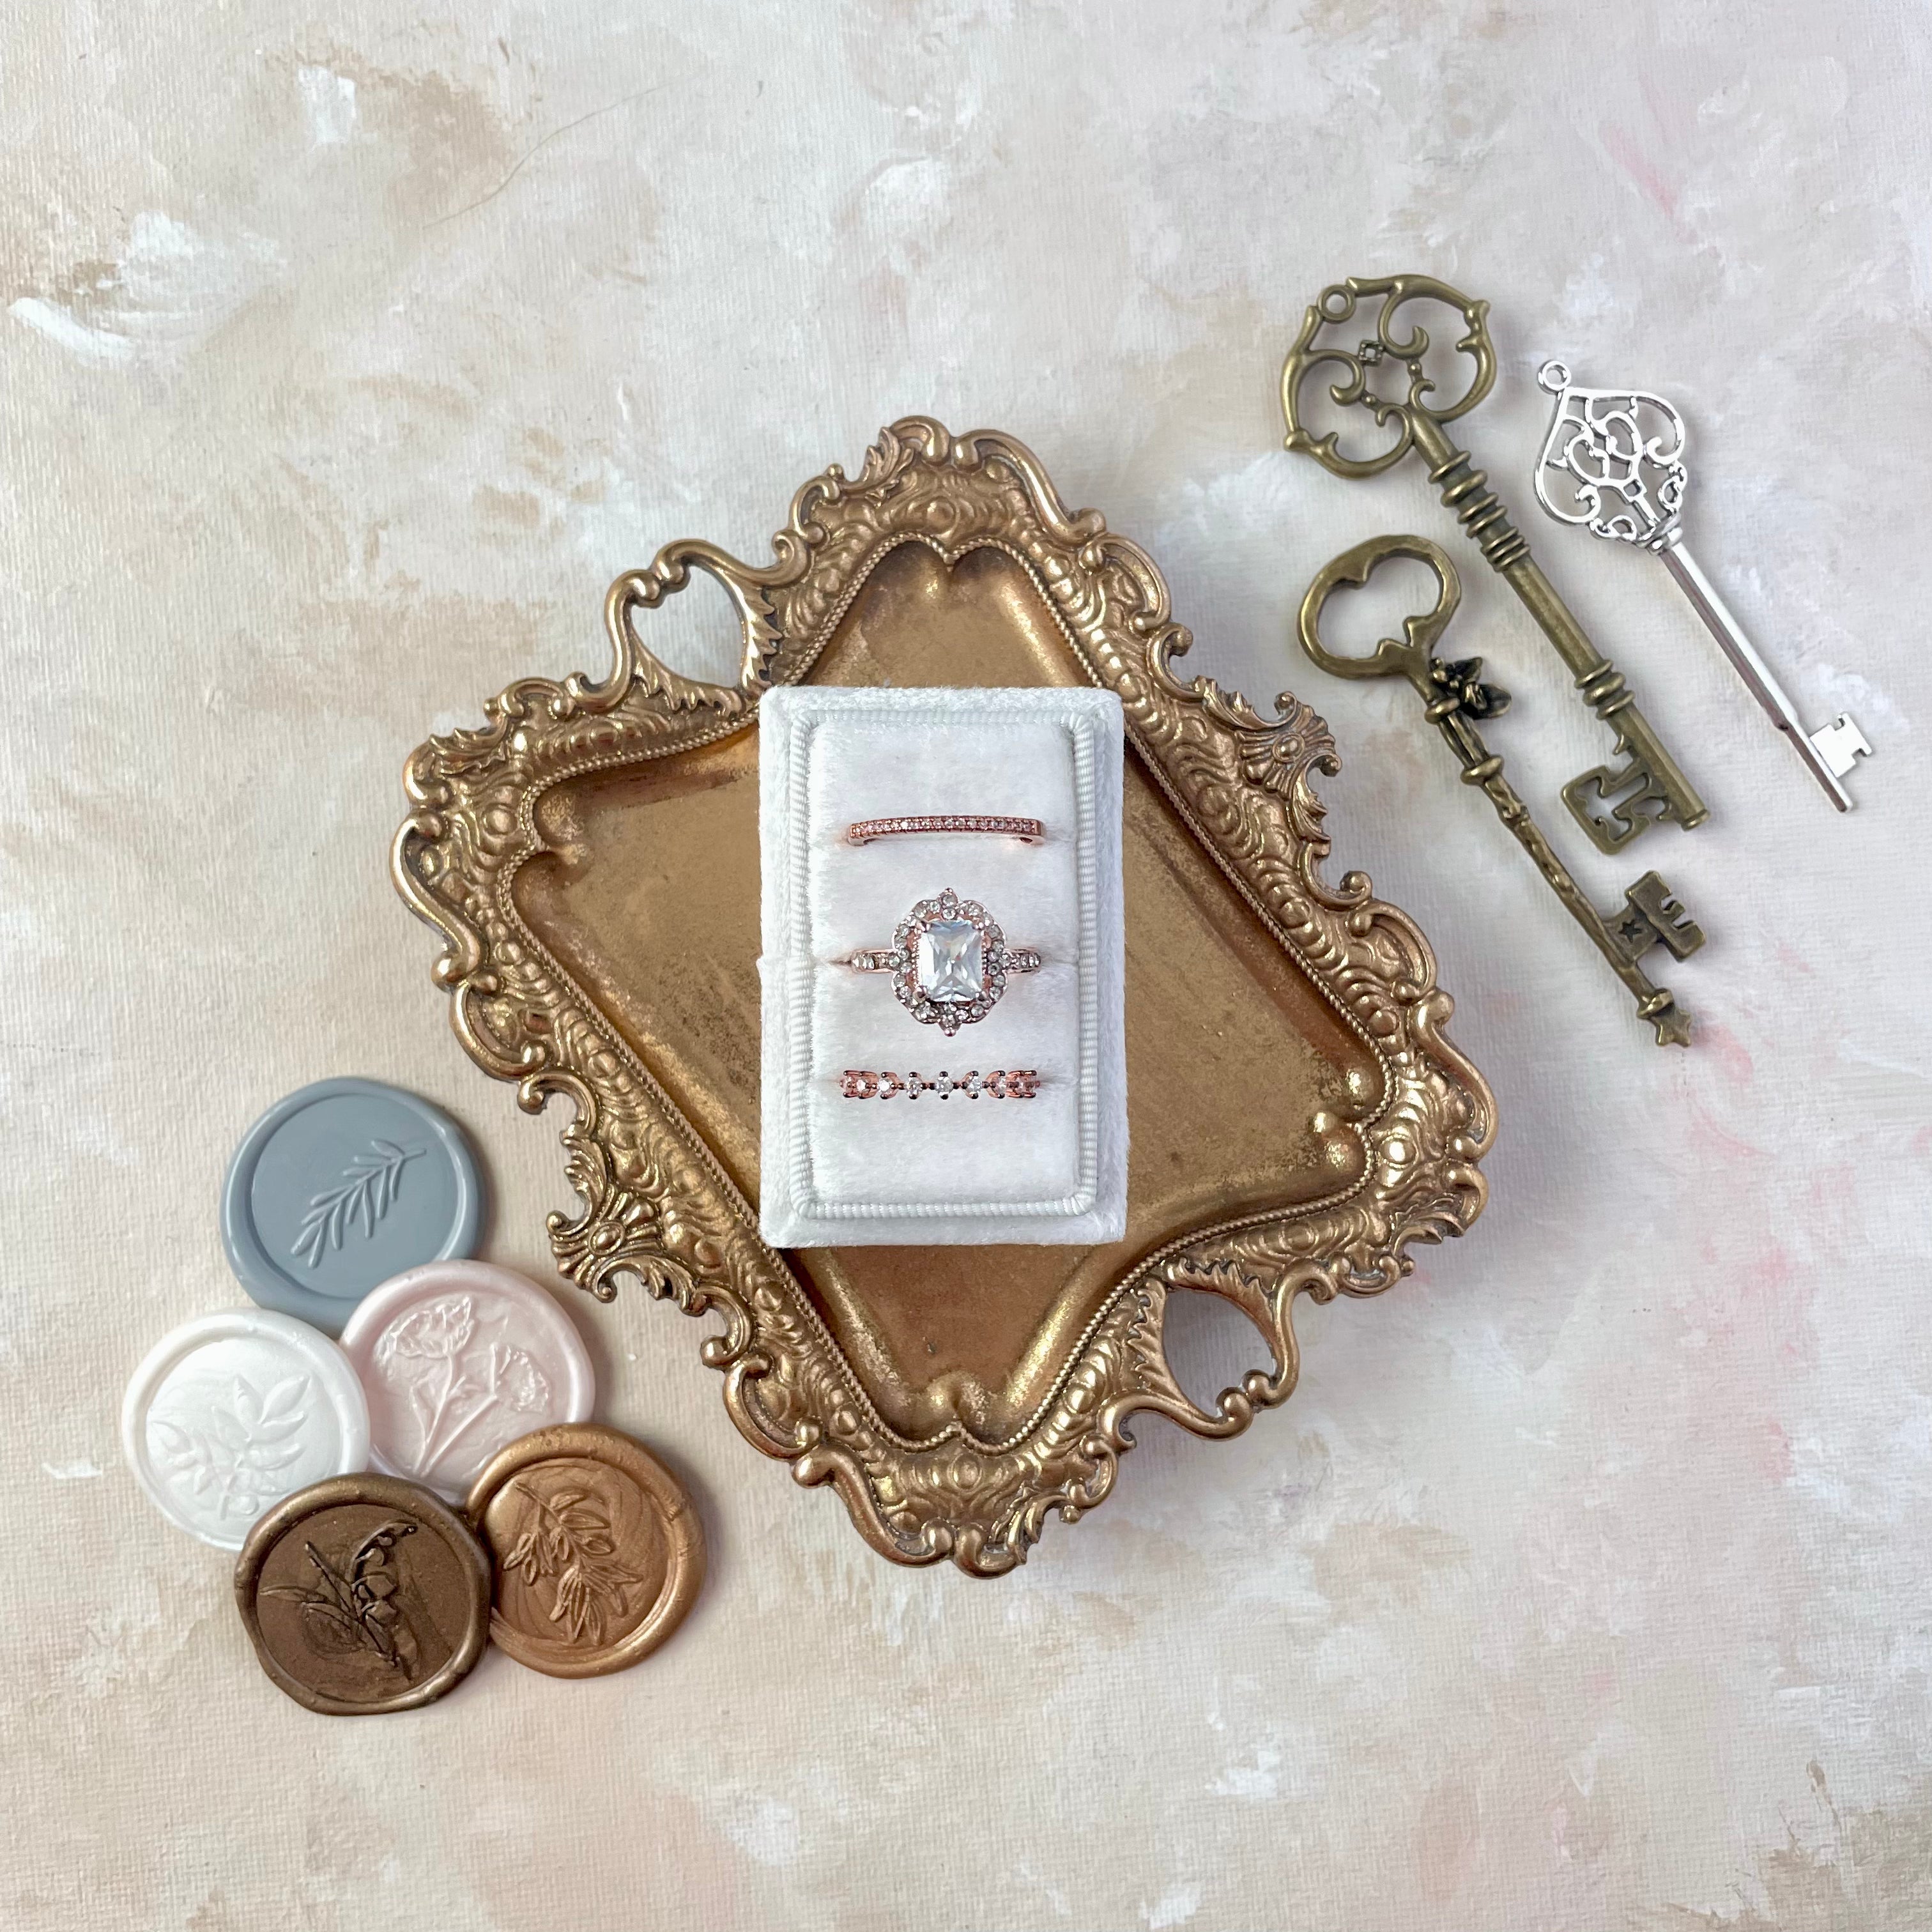 5 Classic neutral color pallet Wax Seals styled beside white 3 slot ring box on gold tray and three vintage keys - wedding flat lay props from Champagne & GRIT